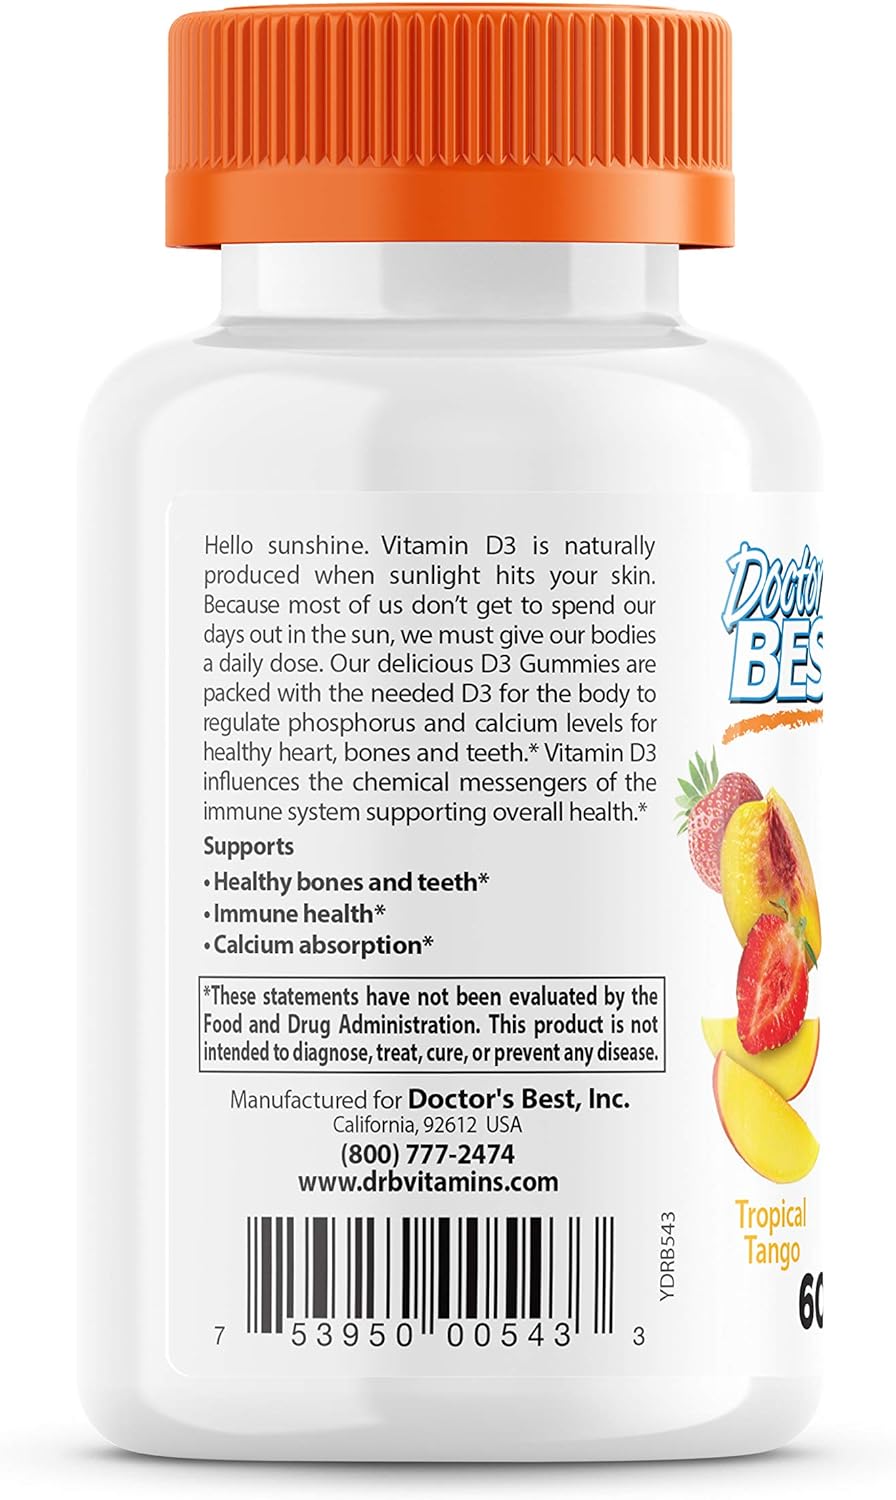 Doctors Best Vitamin D3 Gummies to Support Healthy Bones Immune System and Heart Health, Tropical Tango, 60 Count